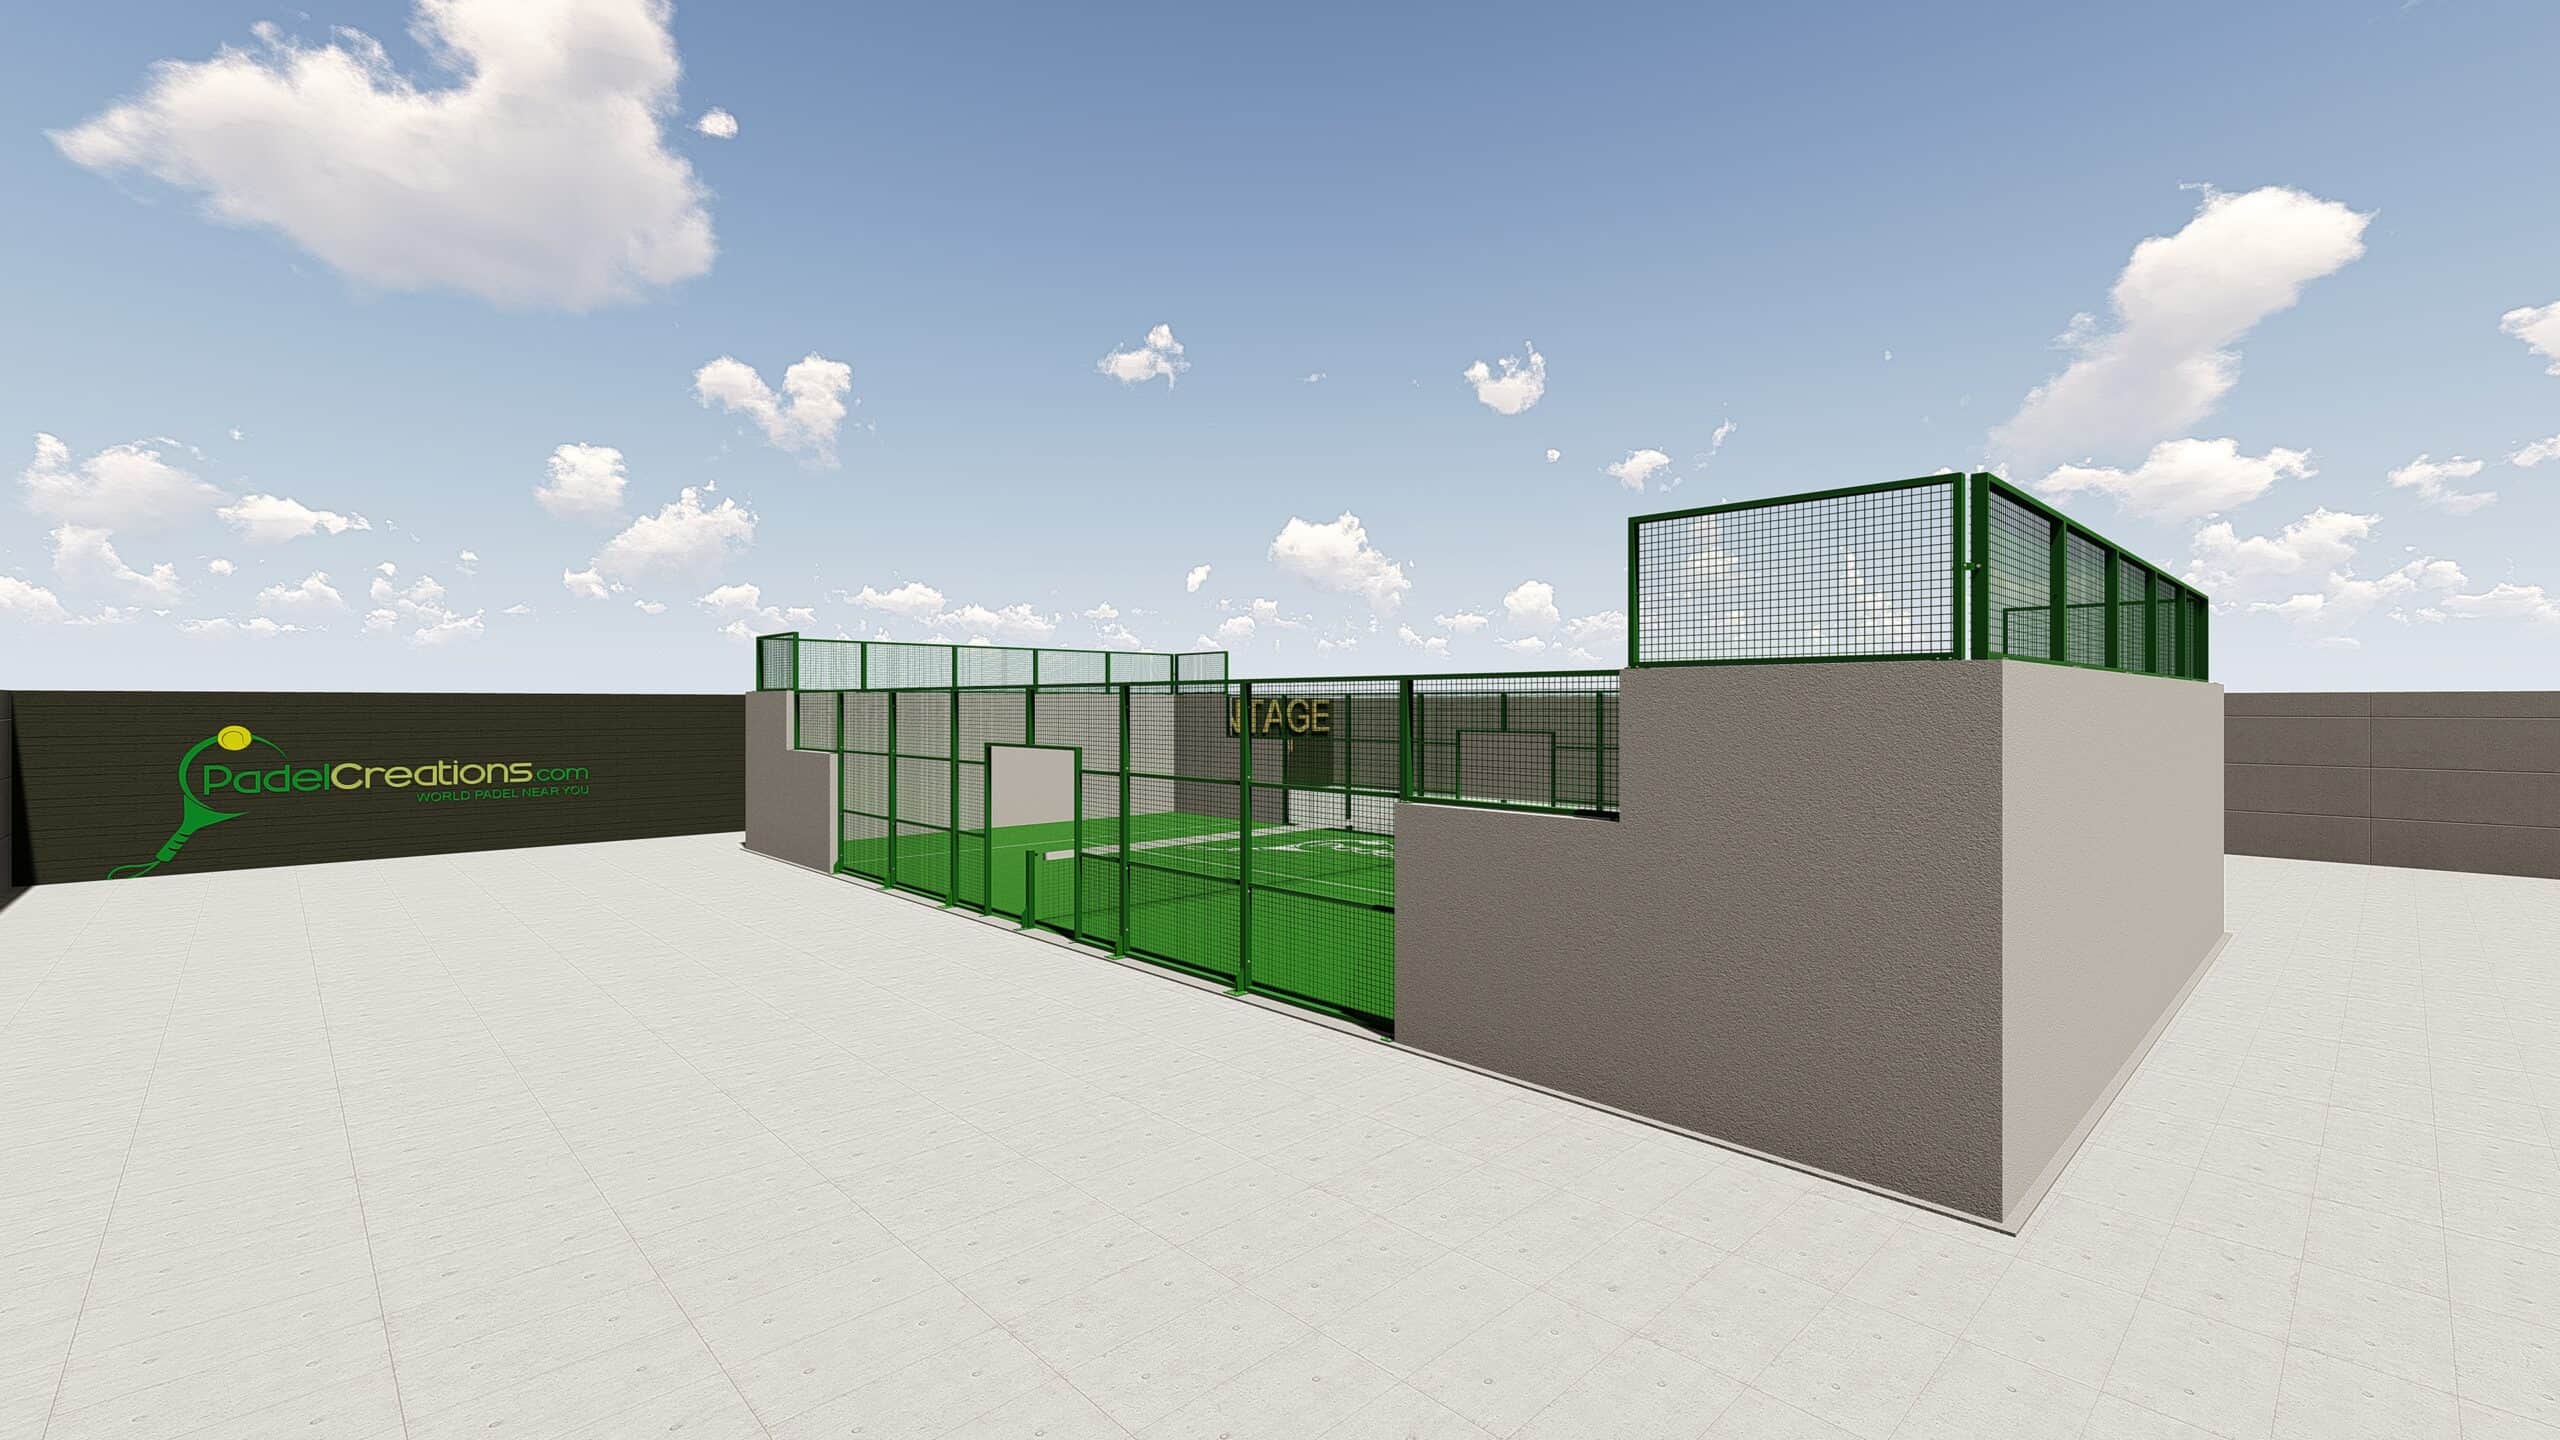 Padelcreations - ▶️ Wir liefern Padelplätze Padel Courts  %Post Title